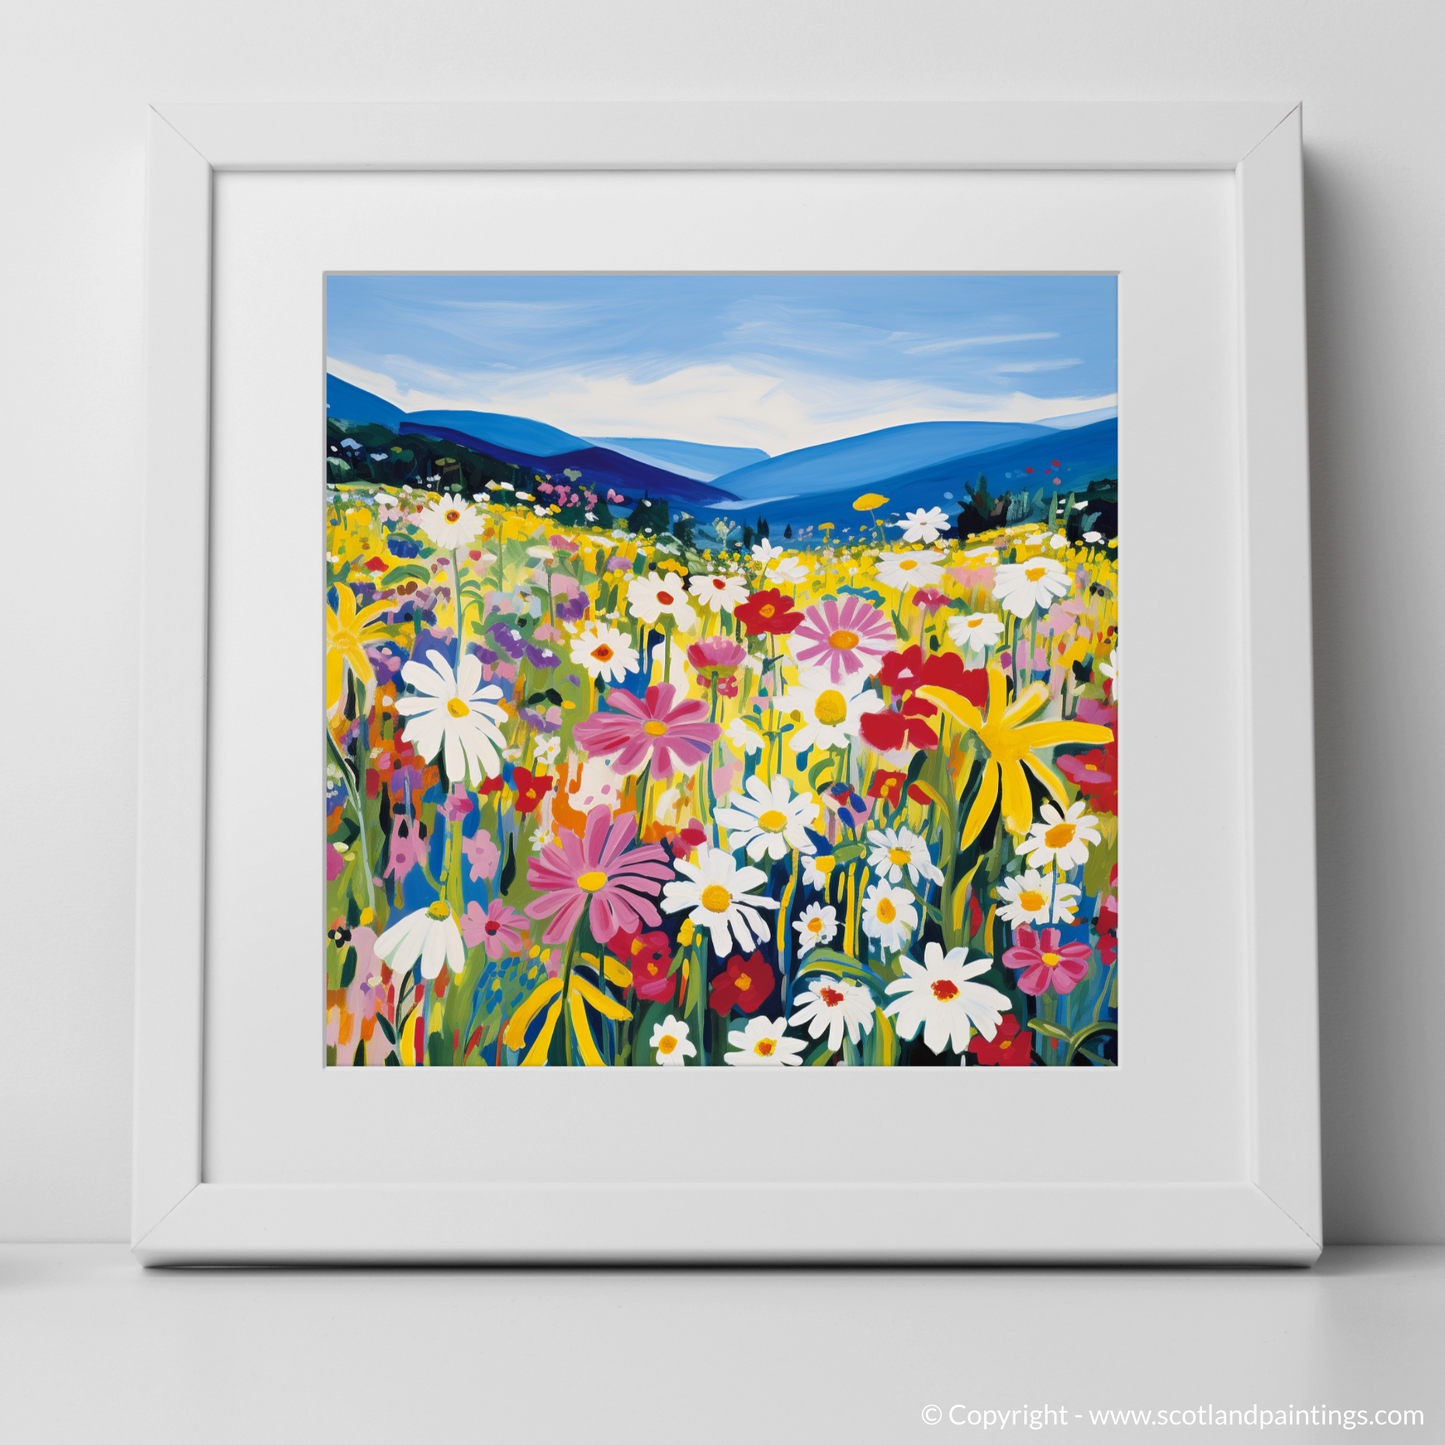 Meadow Dance in The Trossachs: A Fauvist Tribute to Scottish Wildflowers